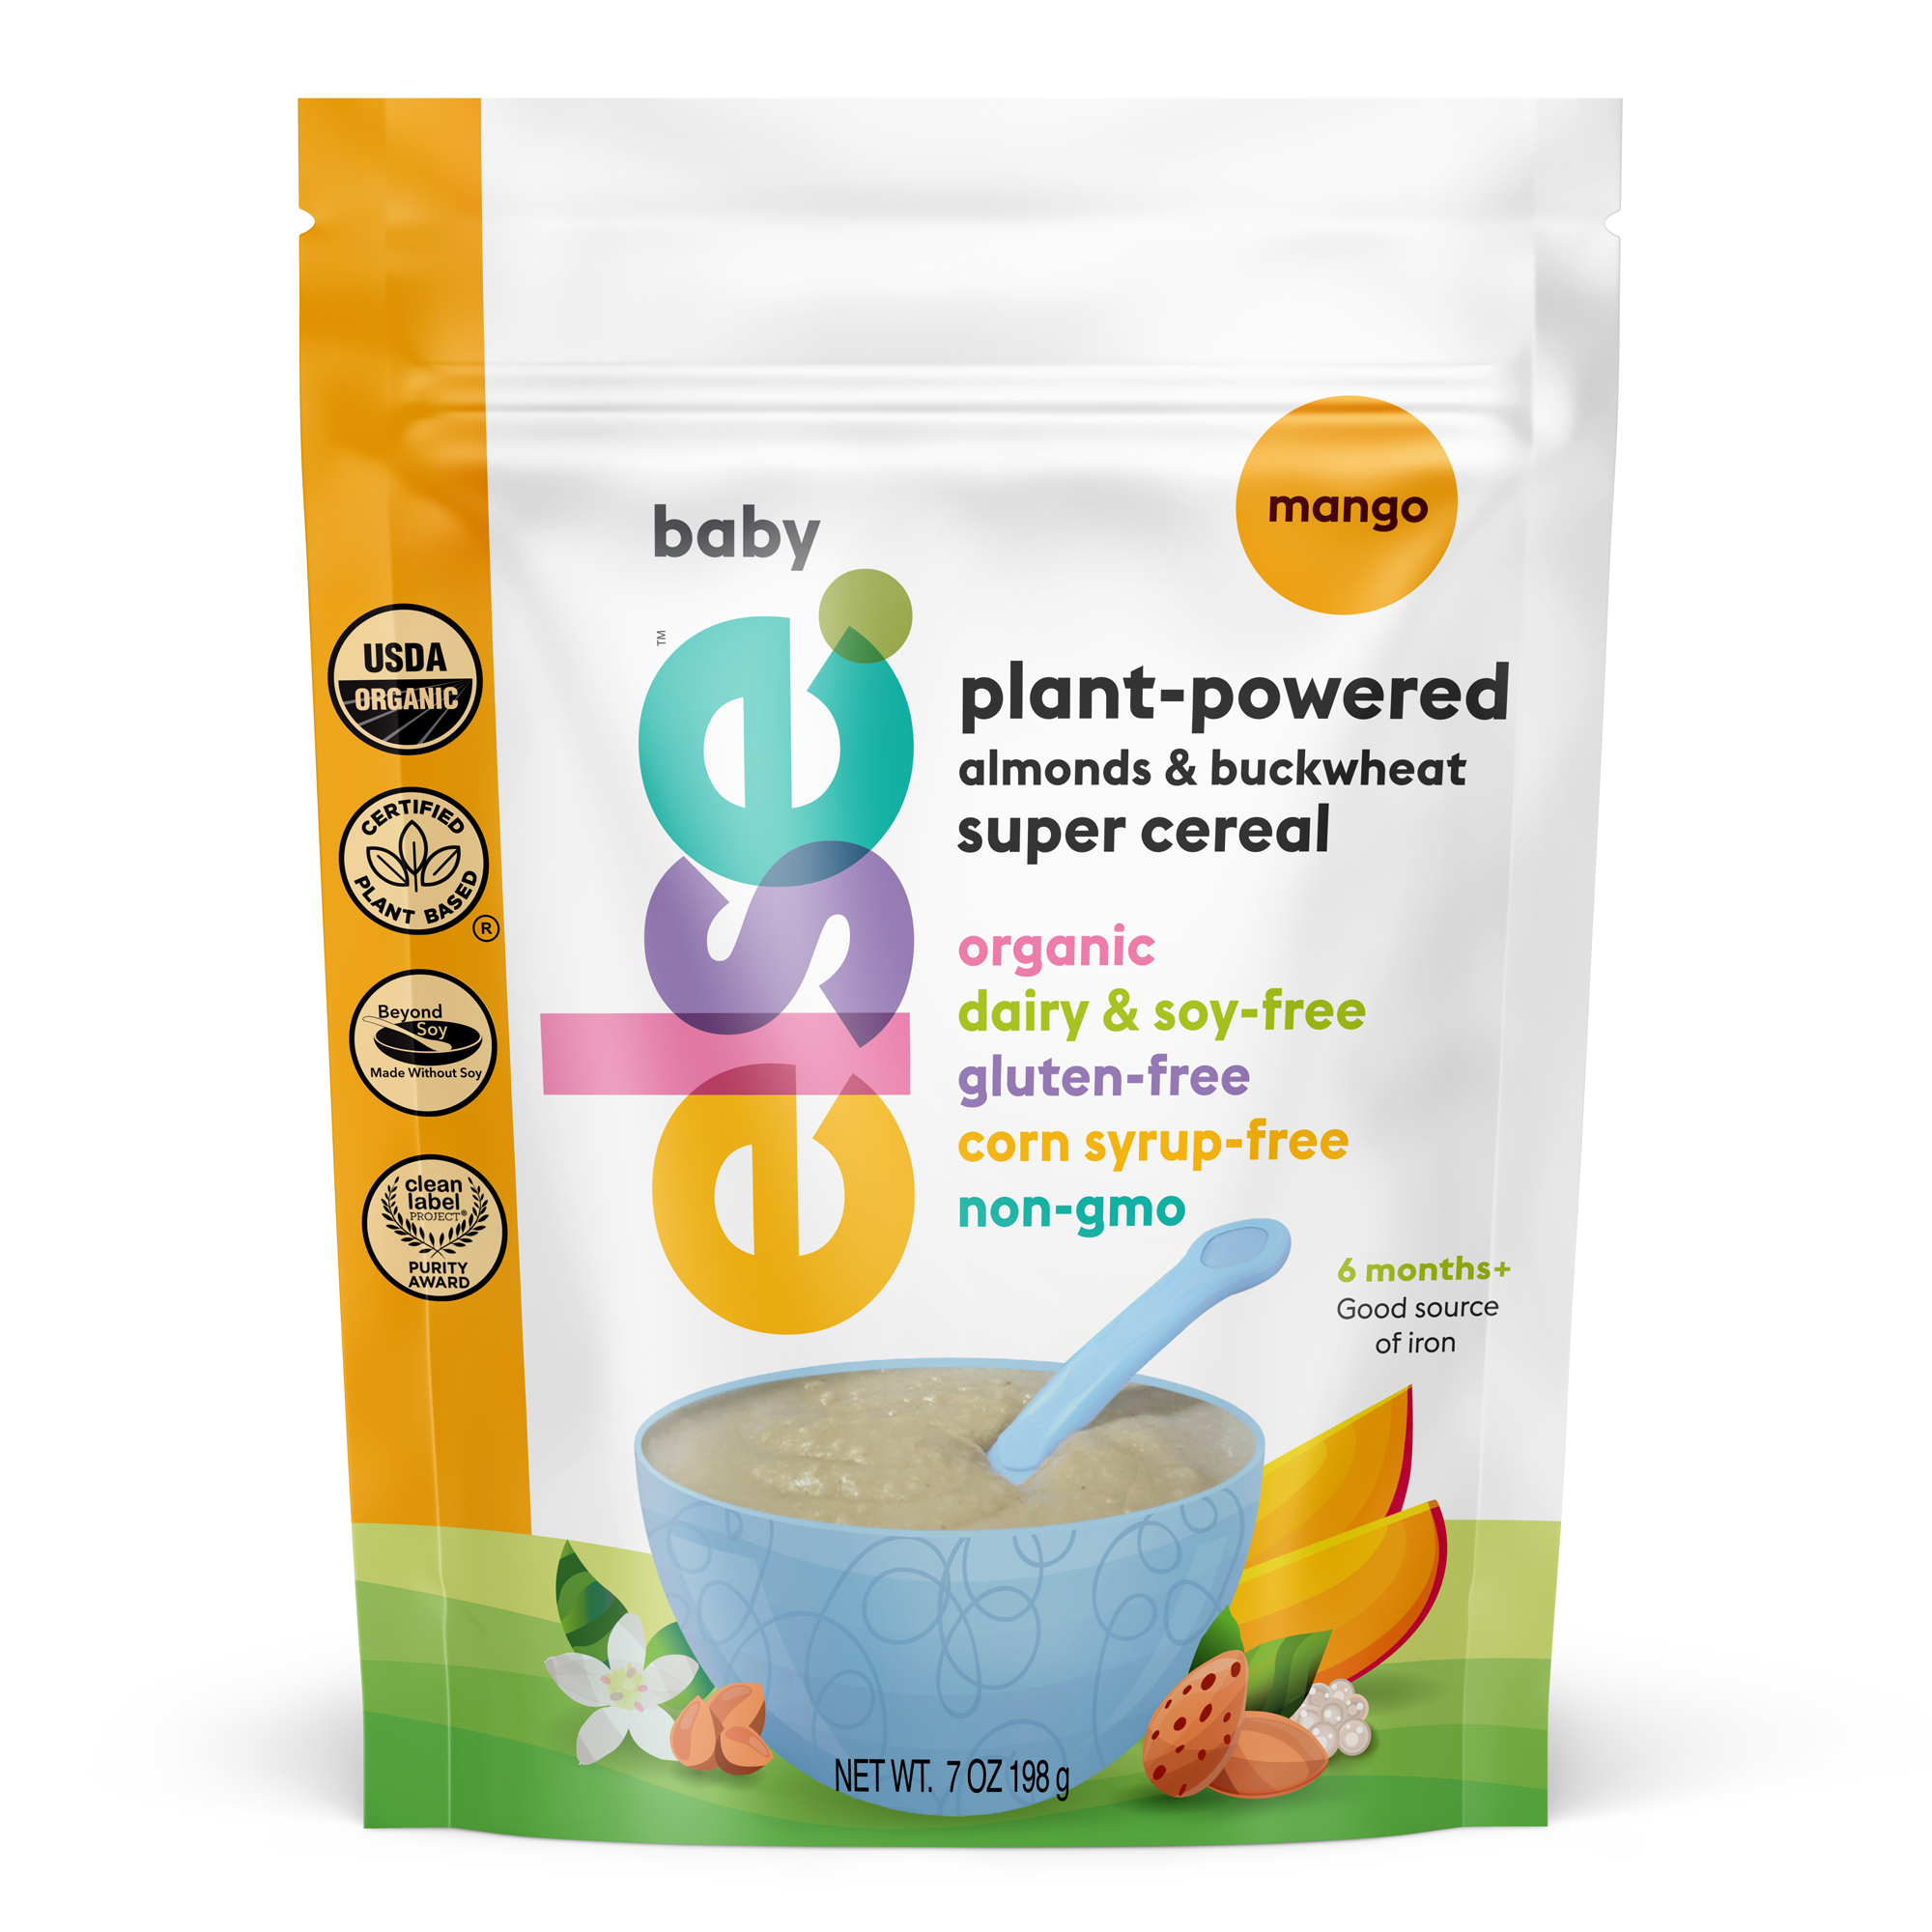 Else Nutrition Baby Plant-Powered Almonds & Buckwheat Super Cereal, Mango 12 units per case 7.0 oz